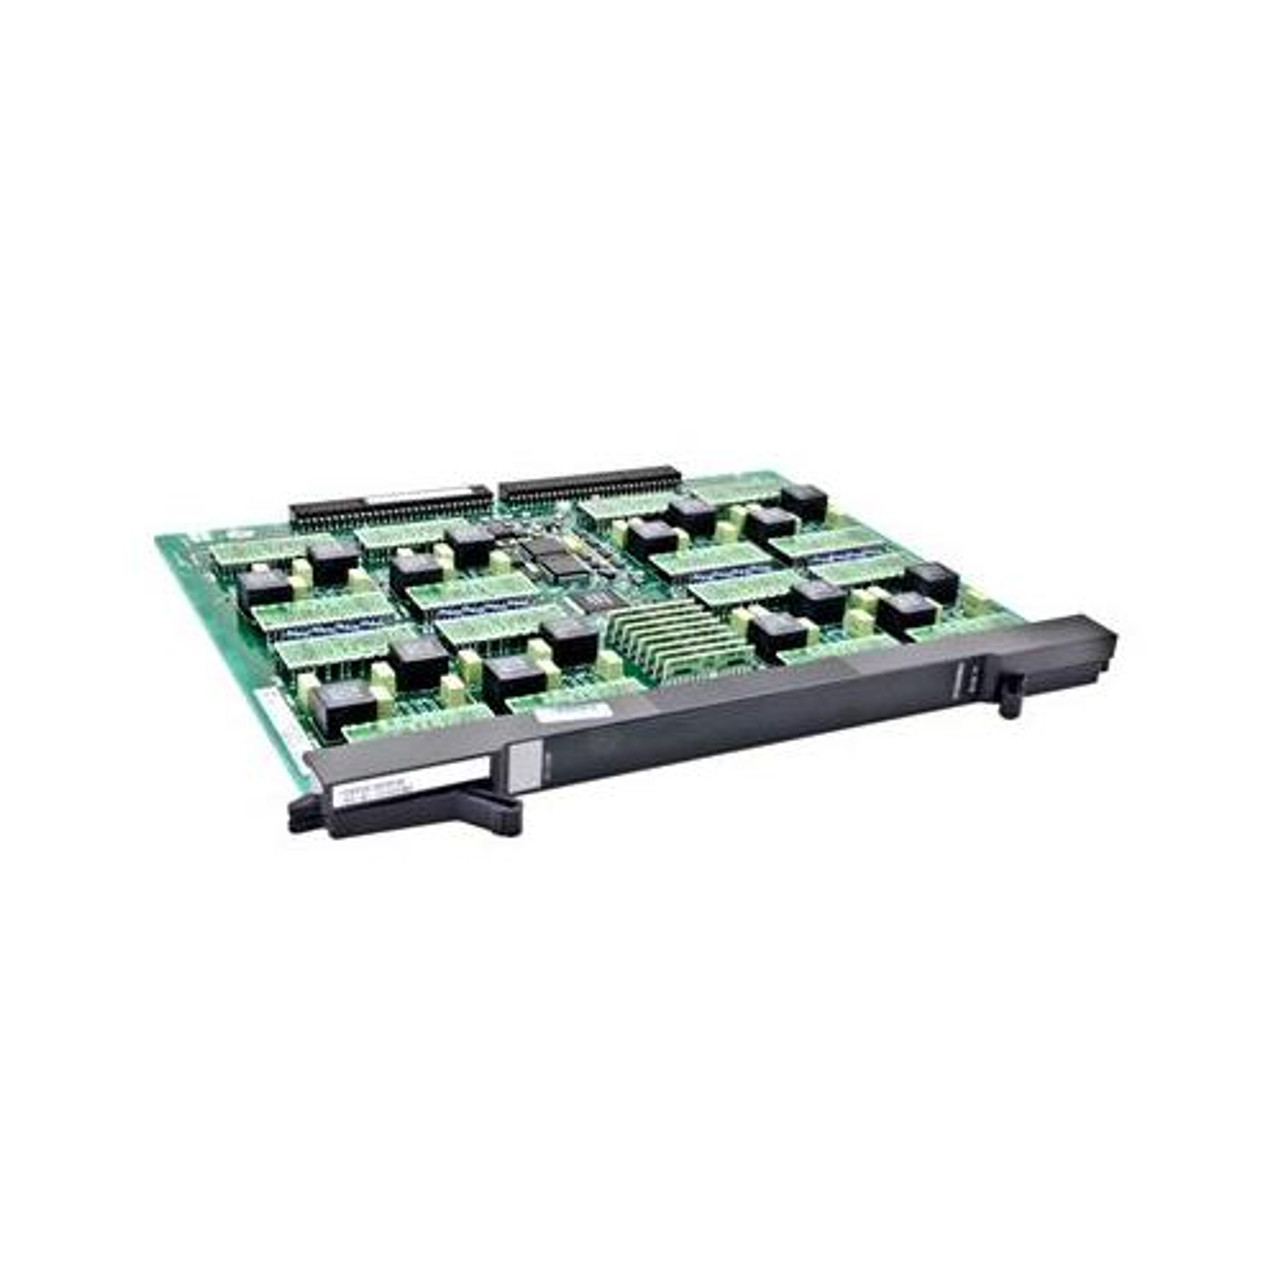 3EM12236AACB Alcatel 12p Ds3 Interface Card (Refurbished)